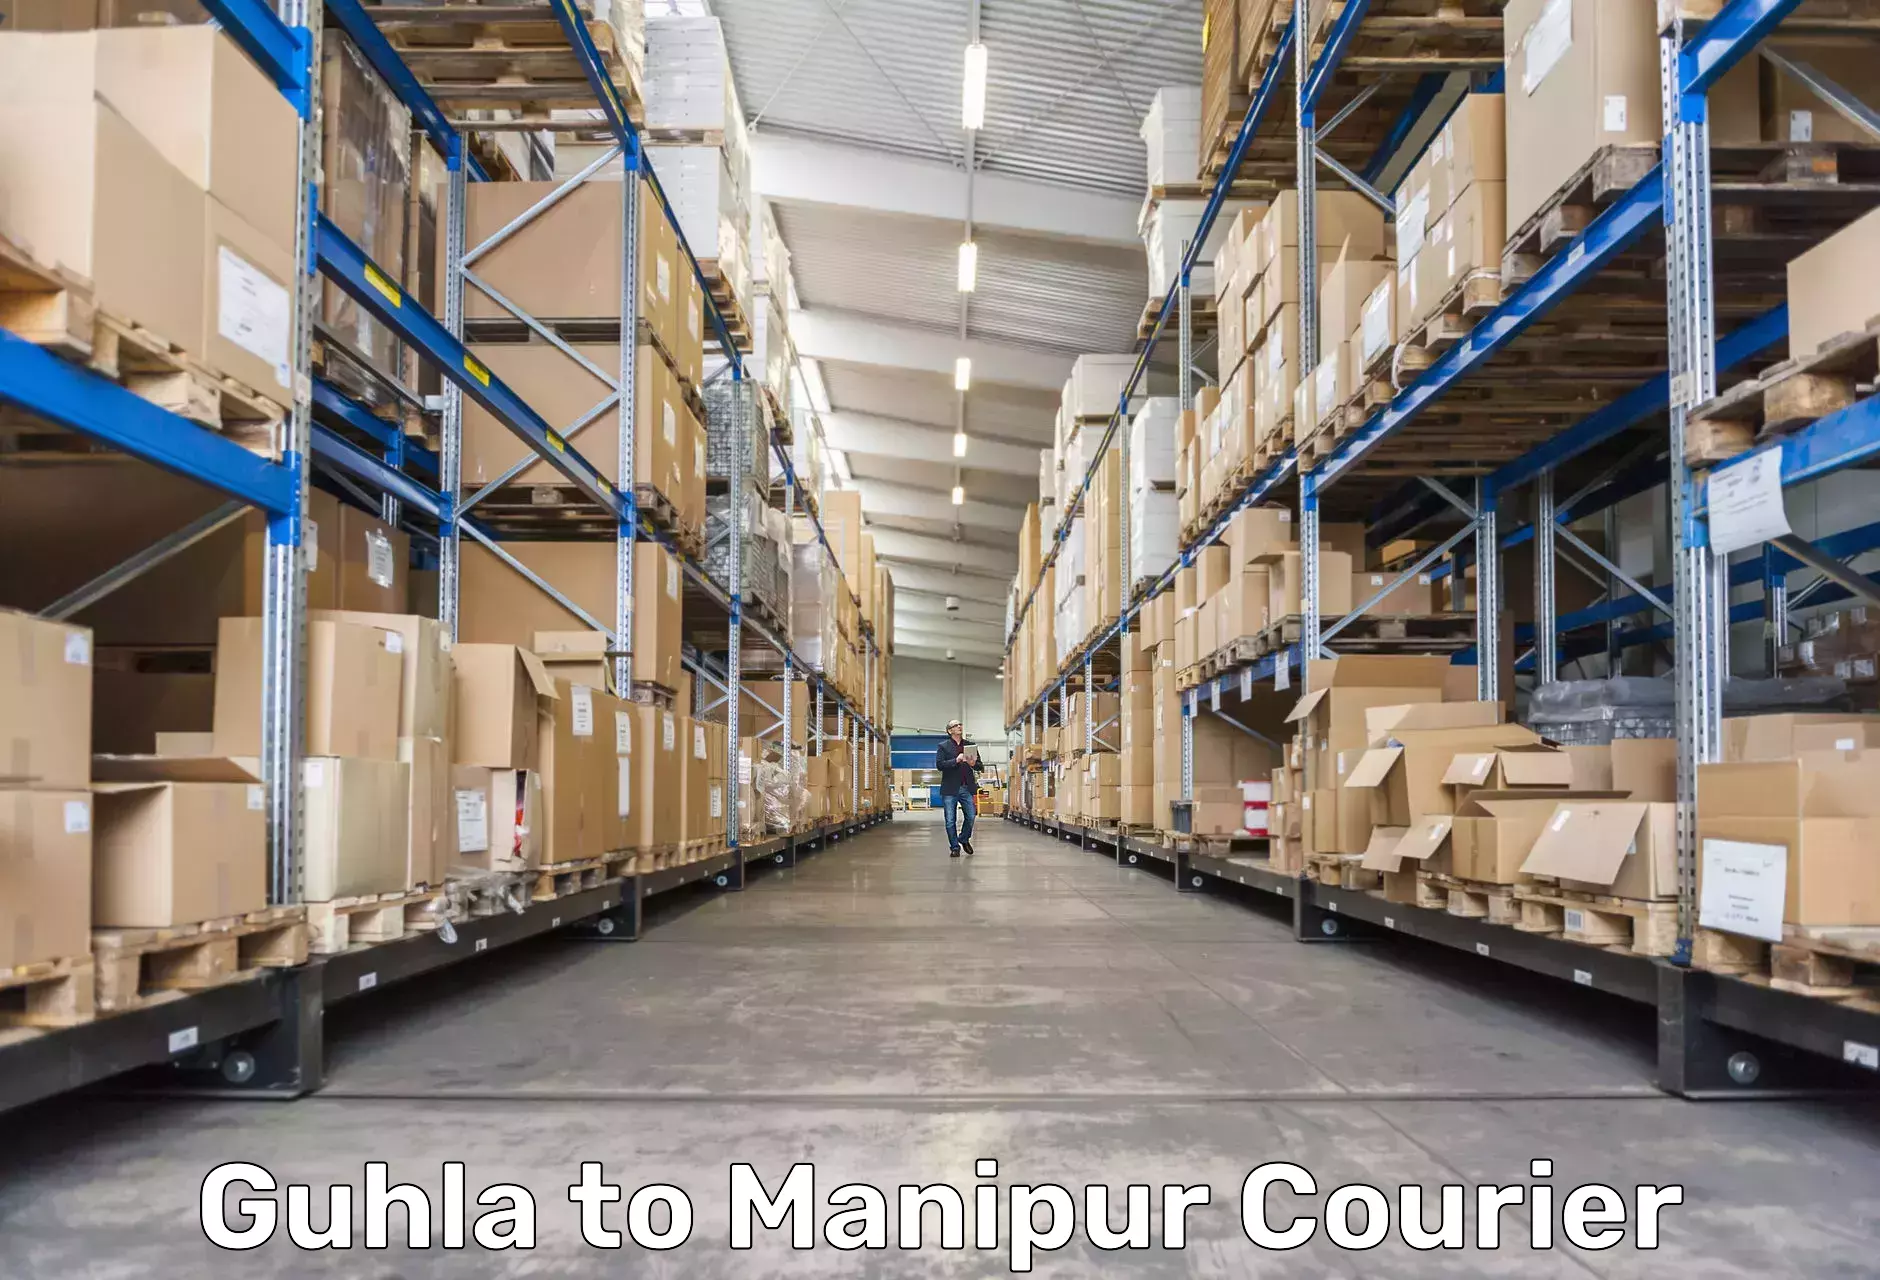 Express delivery capabilities Guhla to Manipur